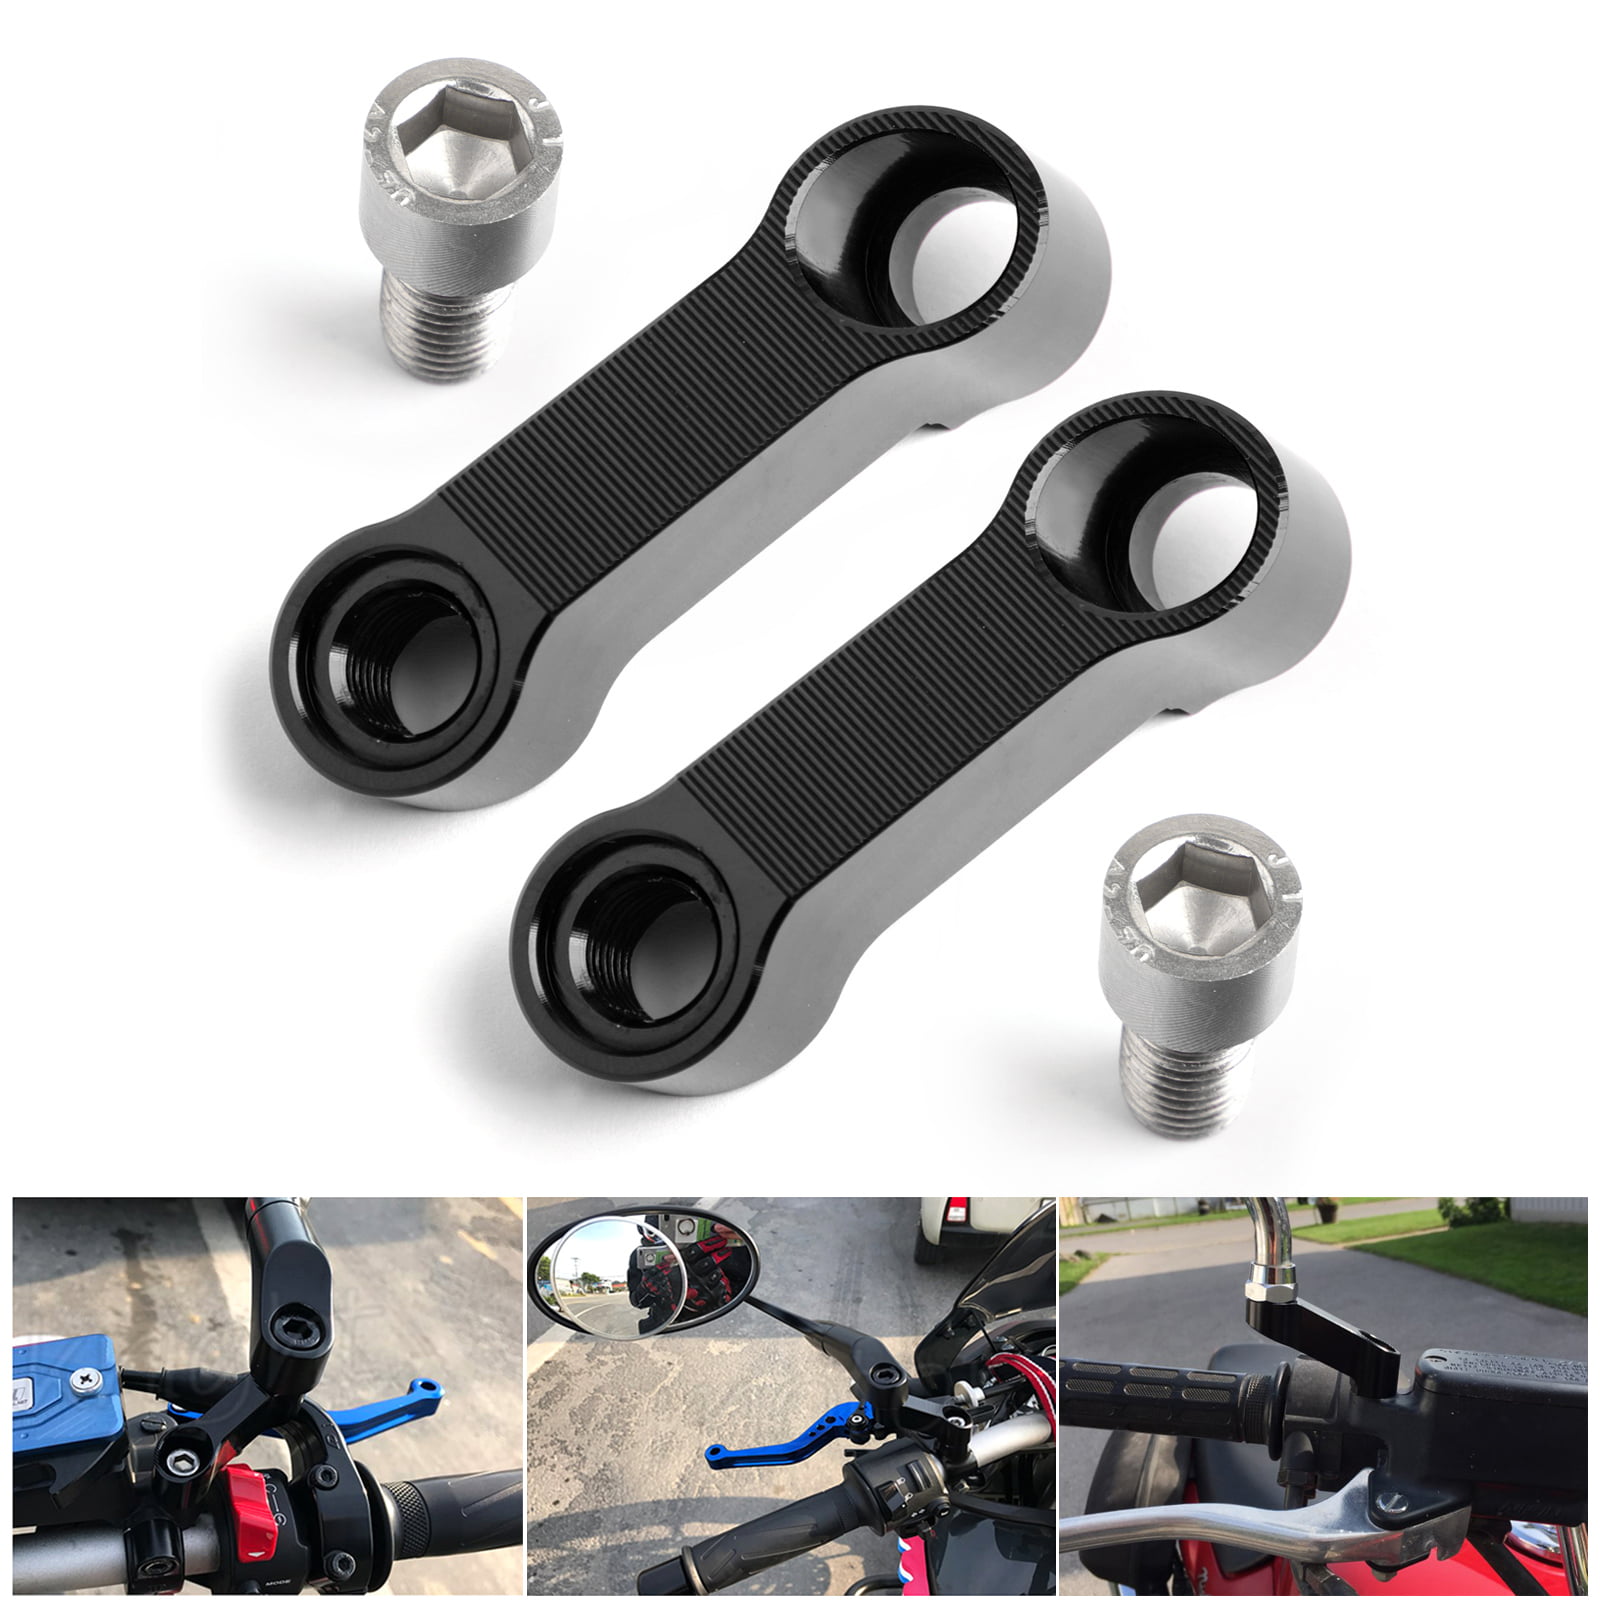 Z10 Motorcycle chrome mirrors Riser Extension Brackets Adapter 1 pair 8mm 